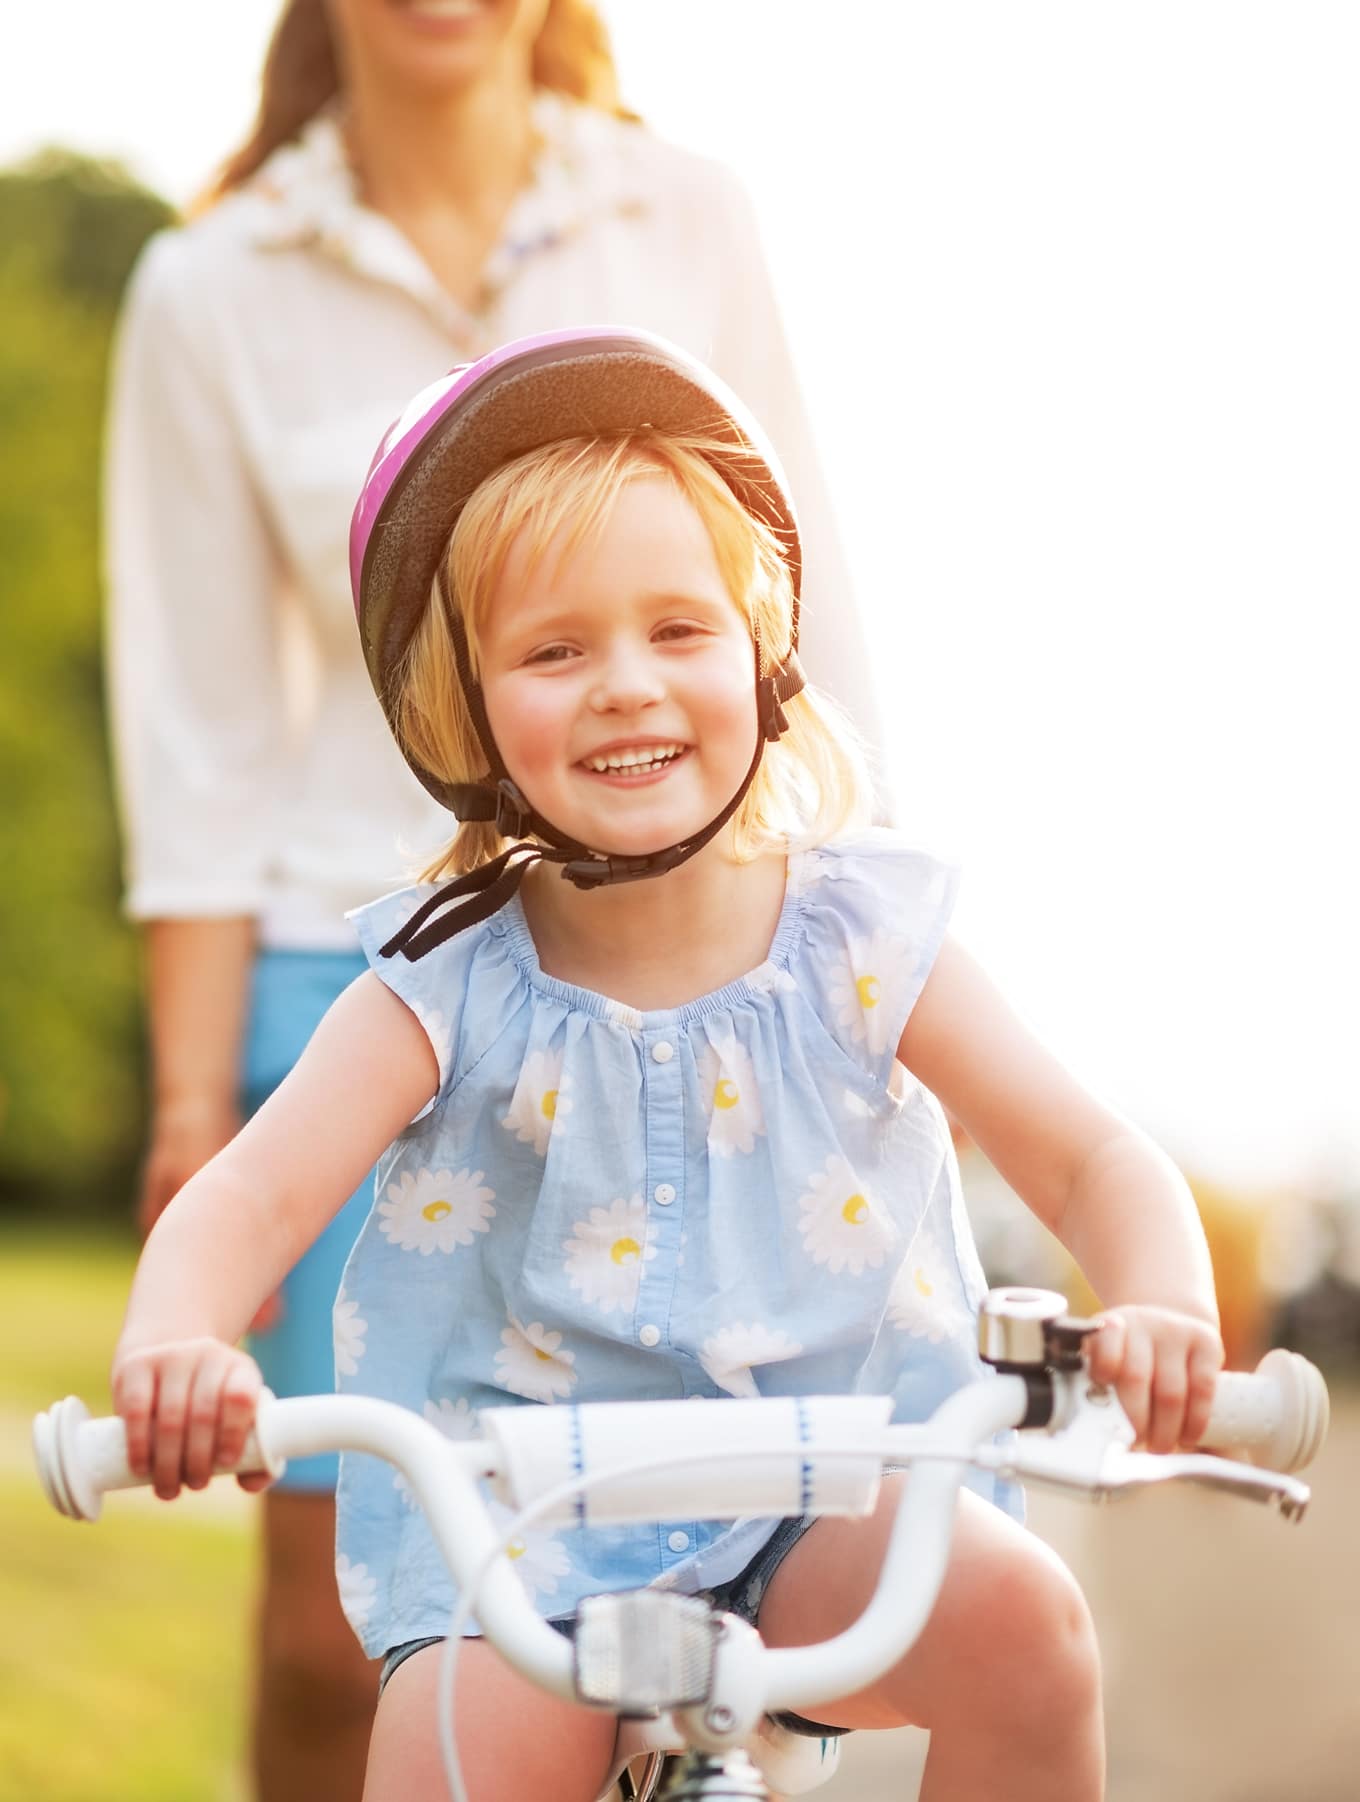 how to teach kid to ride bike without stabilisers